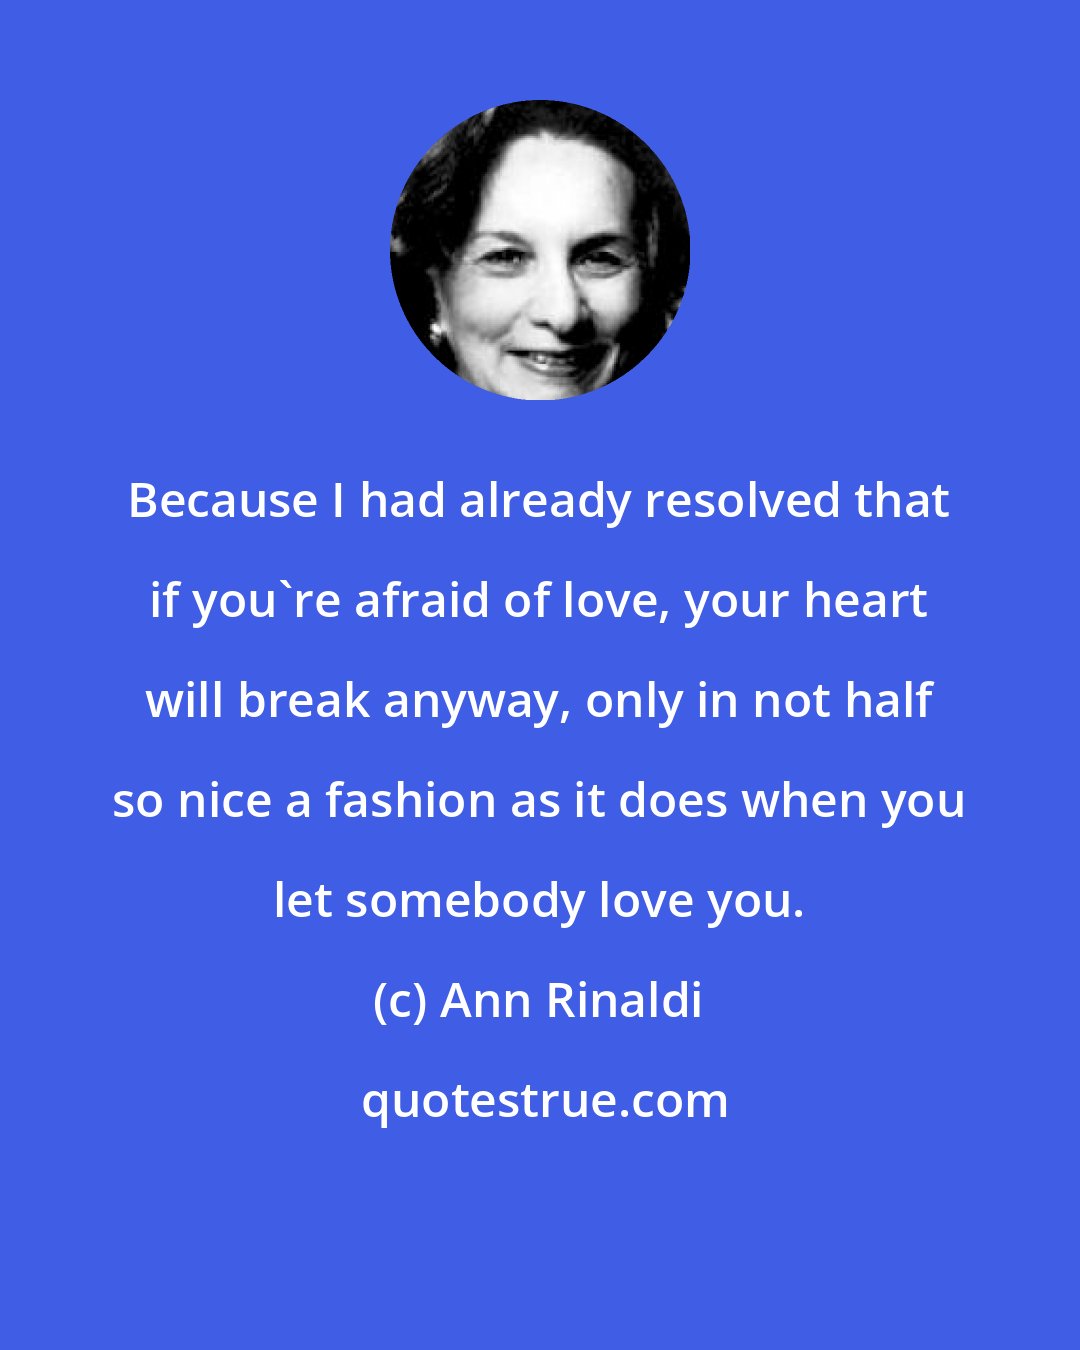 Ann Rinaldi: Because I had already resolved that if you're afraid of love, your heart will break anyway, only in not half so nice a fashion as it does when you let somebody love you.